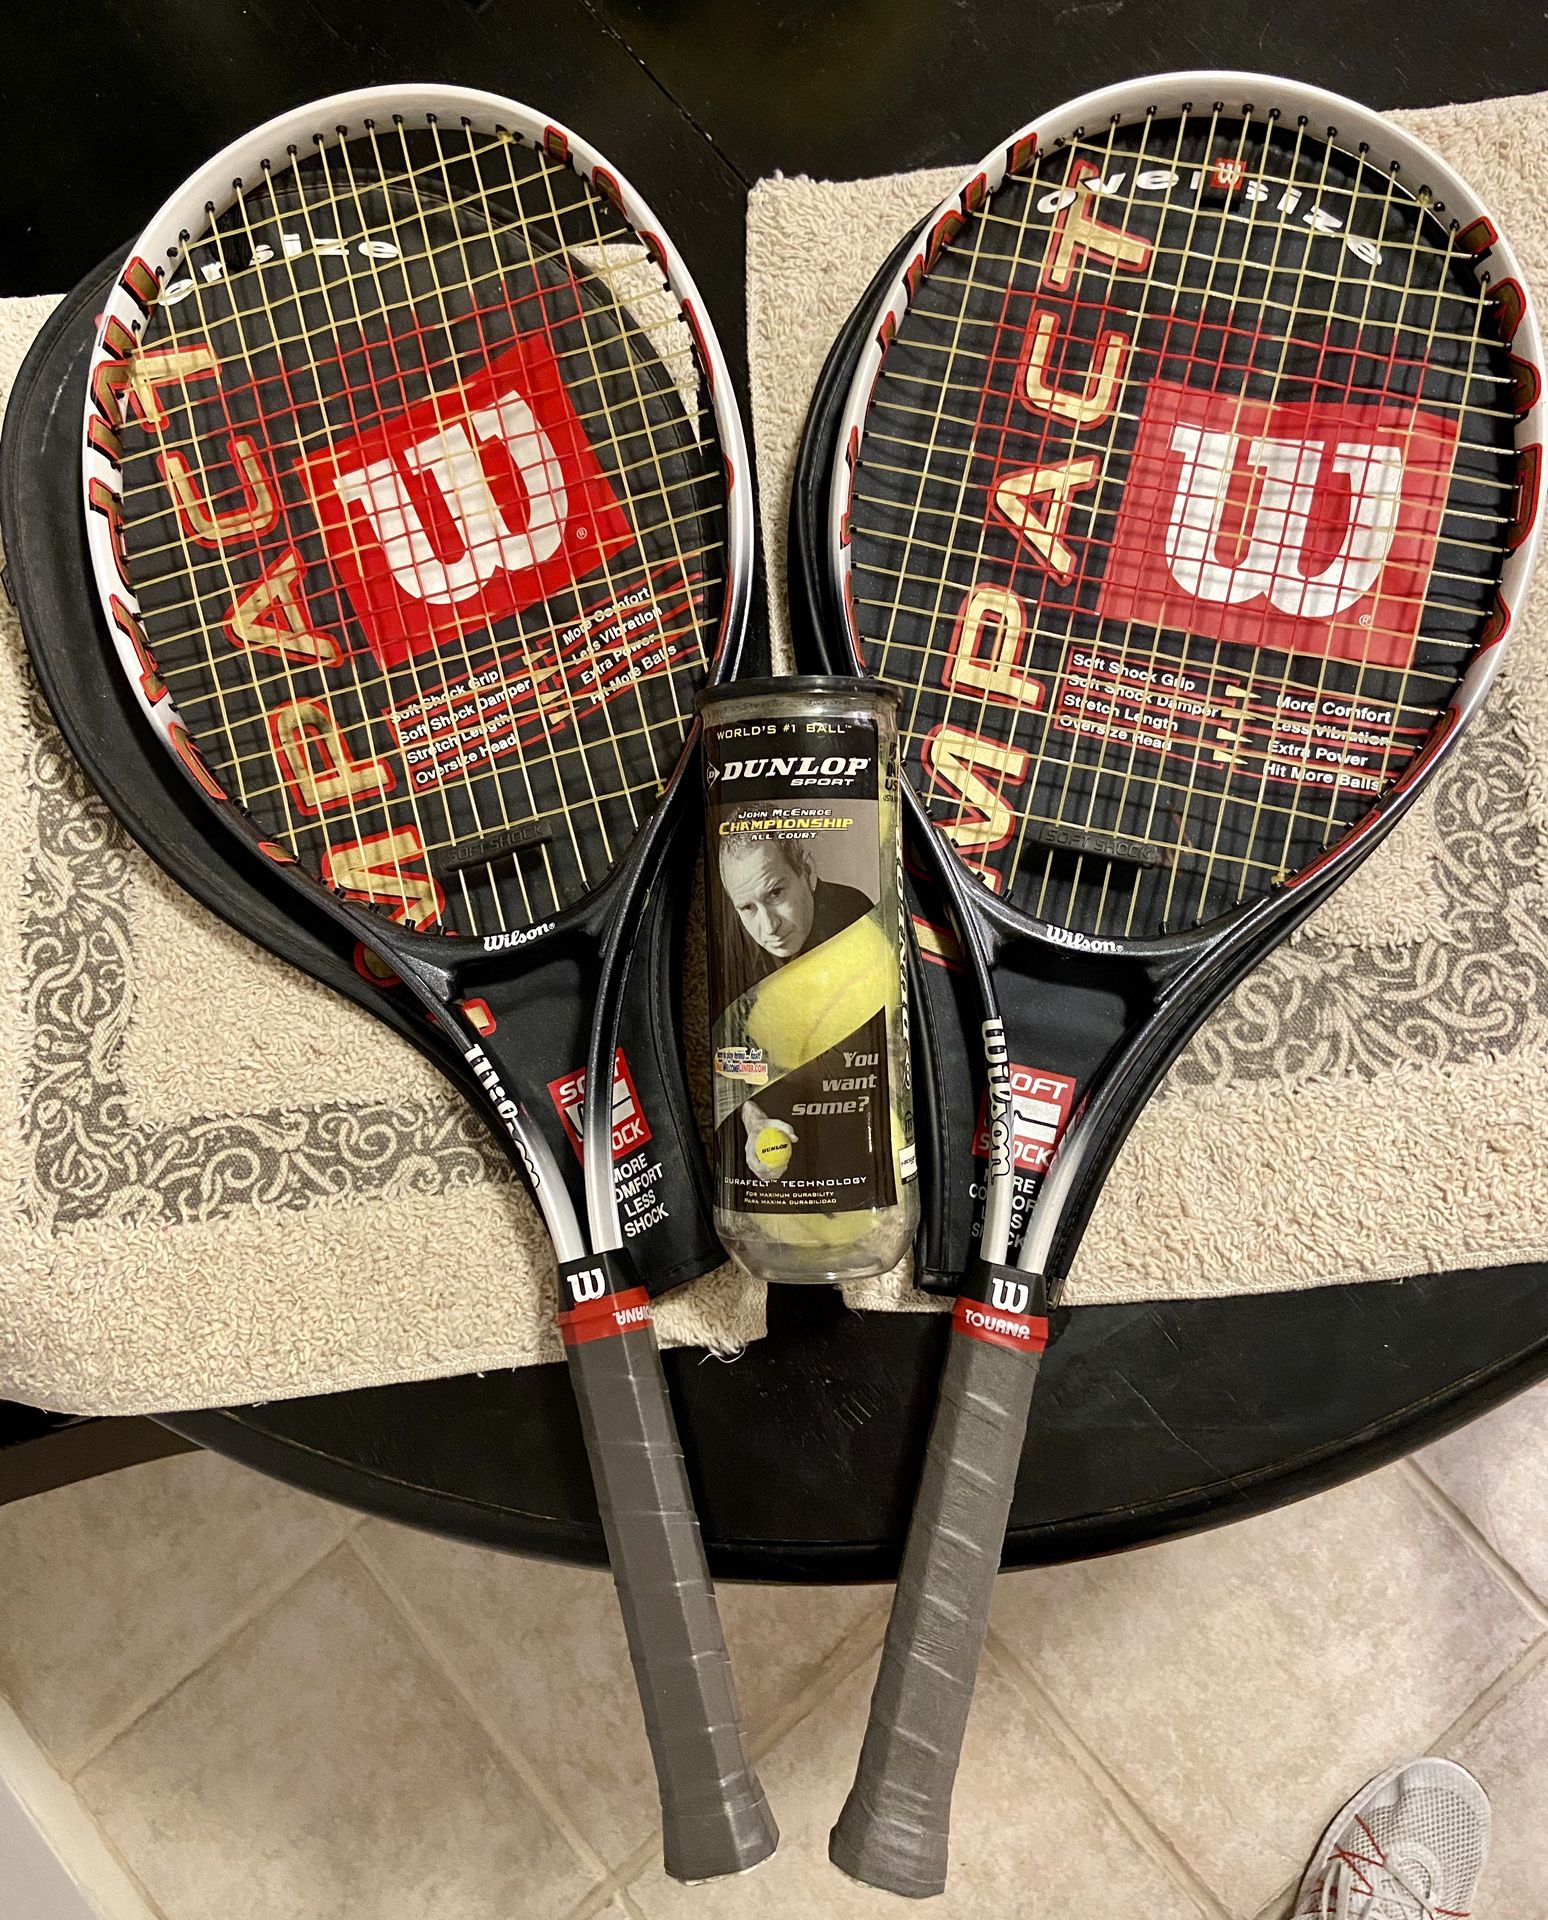 2 Wilson Tennis Rackets (w/ Wilson covers, new grips & 1 new/unopened can of tennis balls)